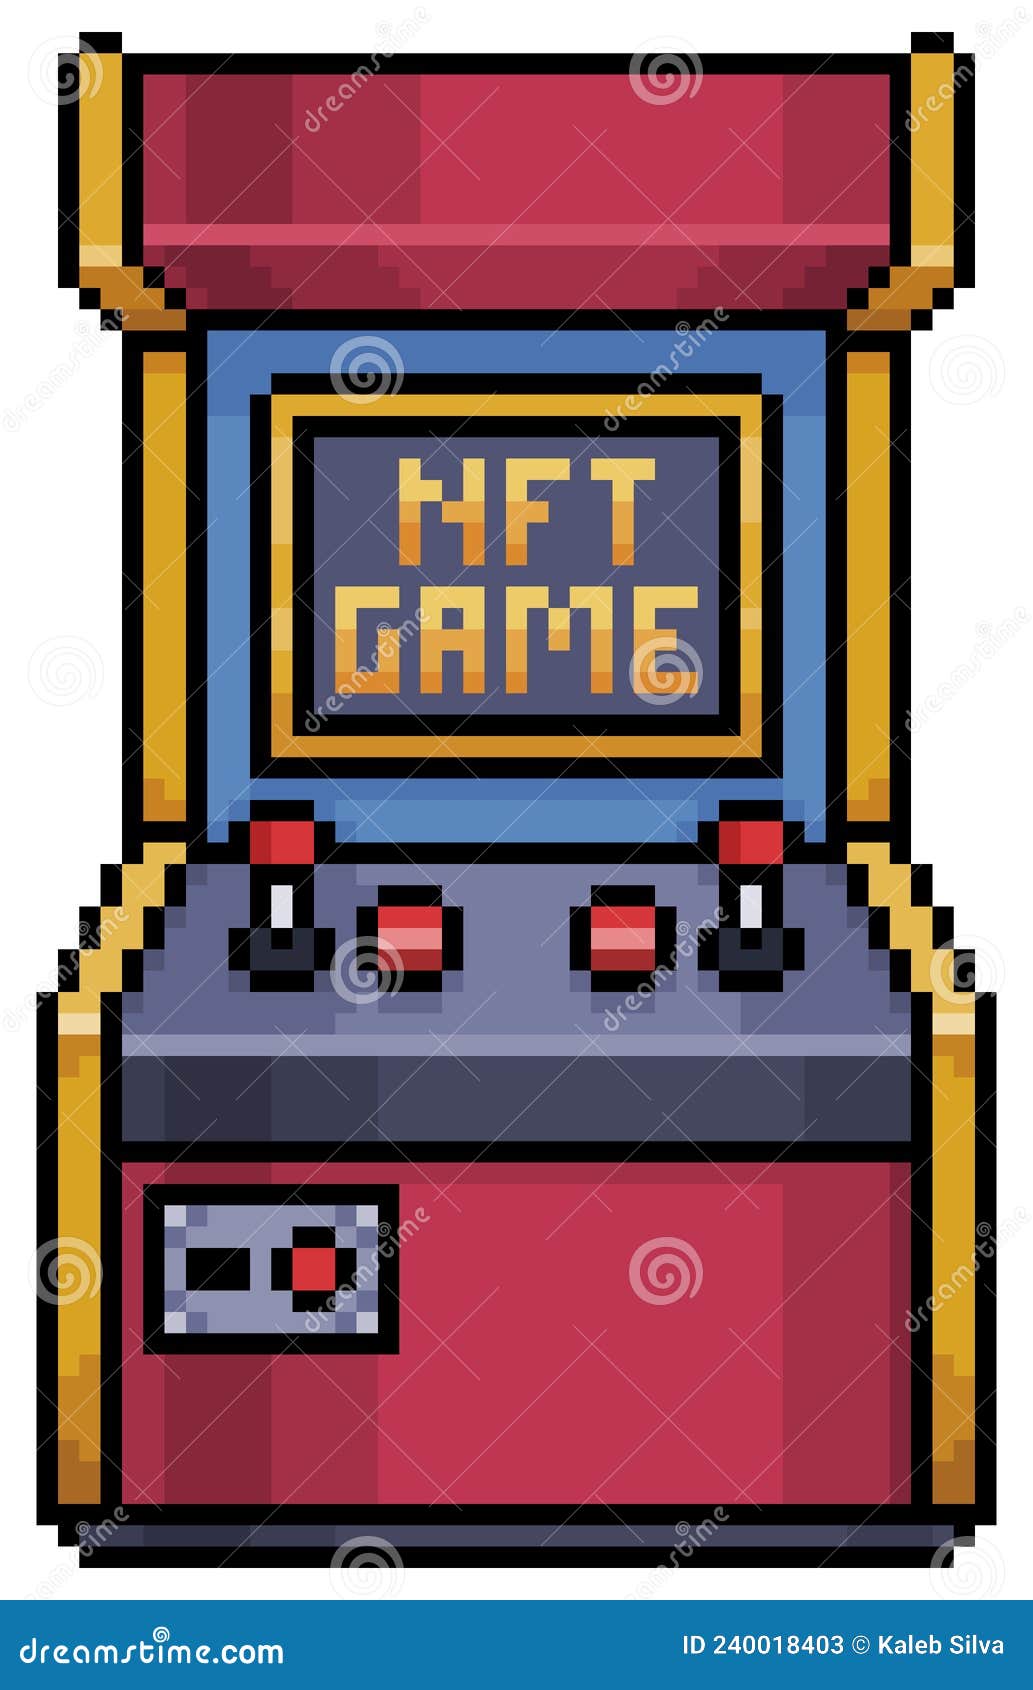 Pixel Art Arcade Game NFT Icon for 8bit Game Stock Vector